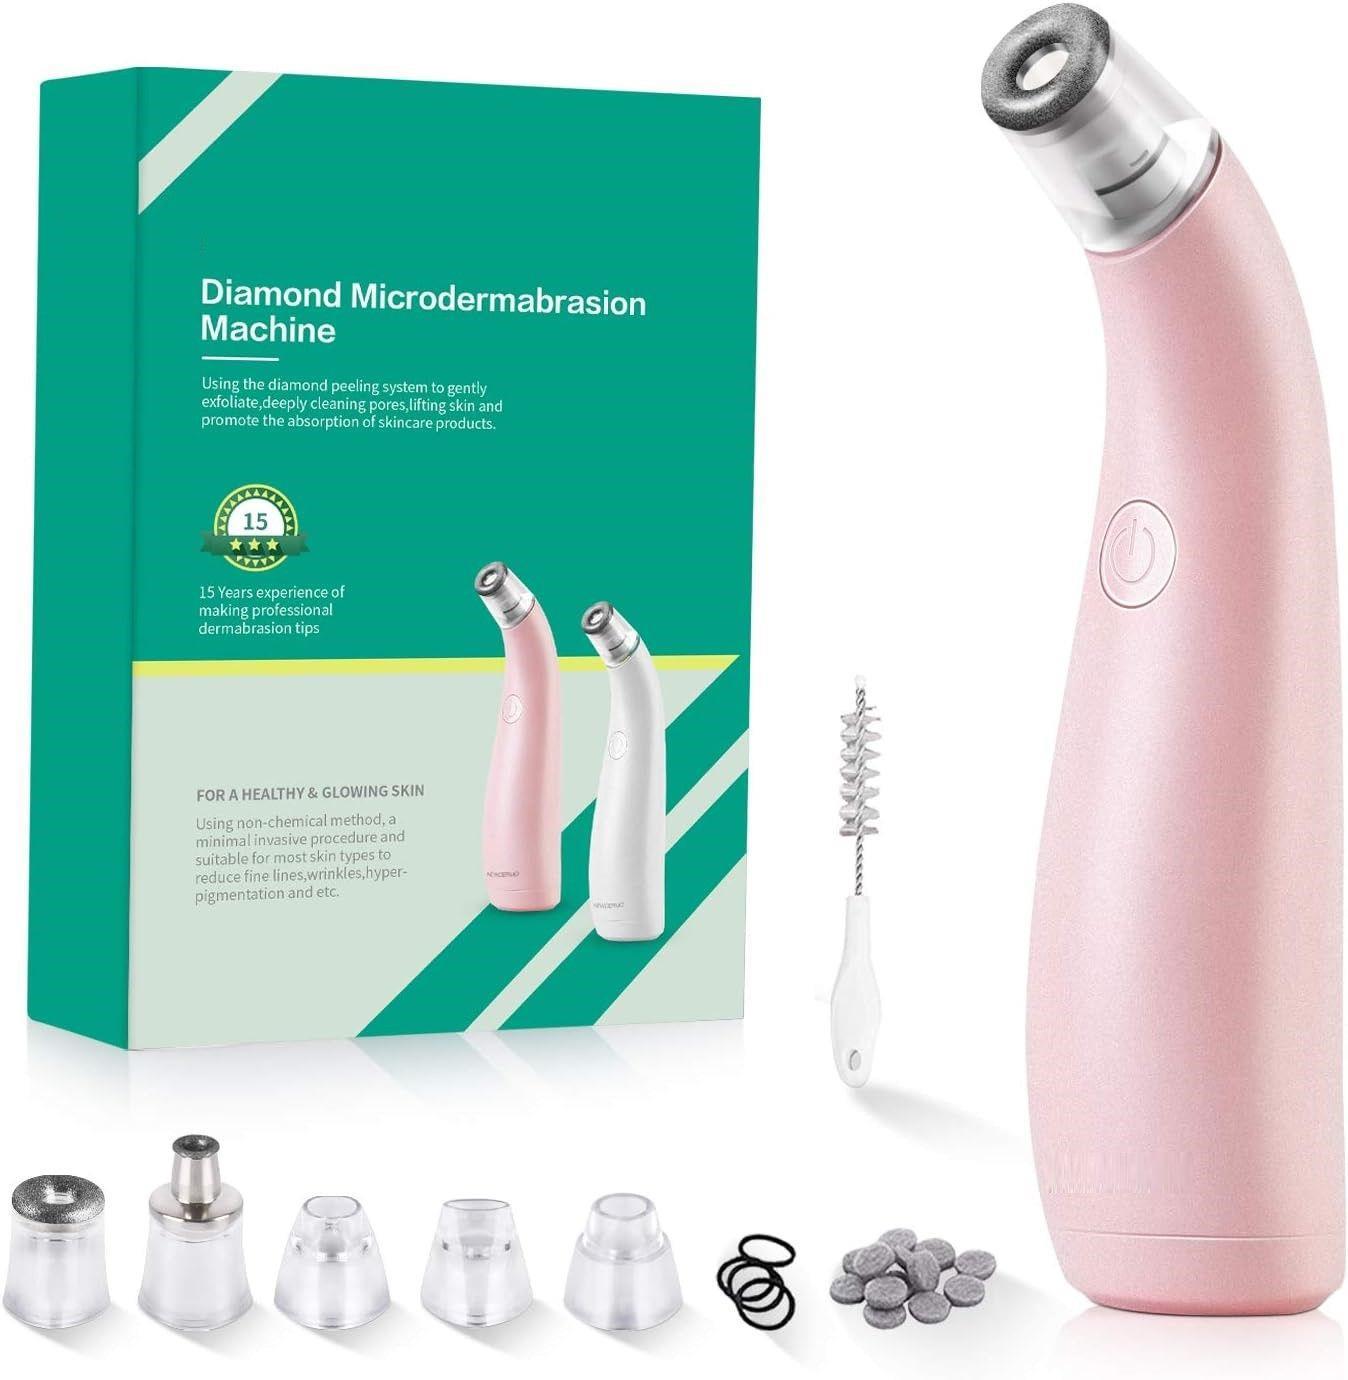 Diamond Microdermabrasion Machine 2-in-1, Diamond, Electric Blackhead Remover, Pore Vacuum Cleaner, Facial Exfoliation Tool, 5 Replaceable Suction Heads